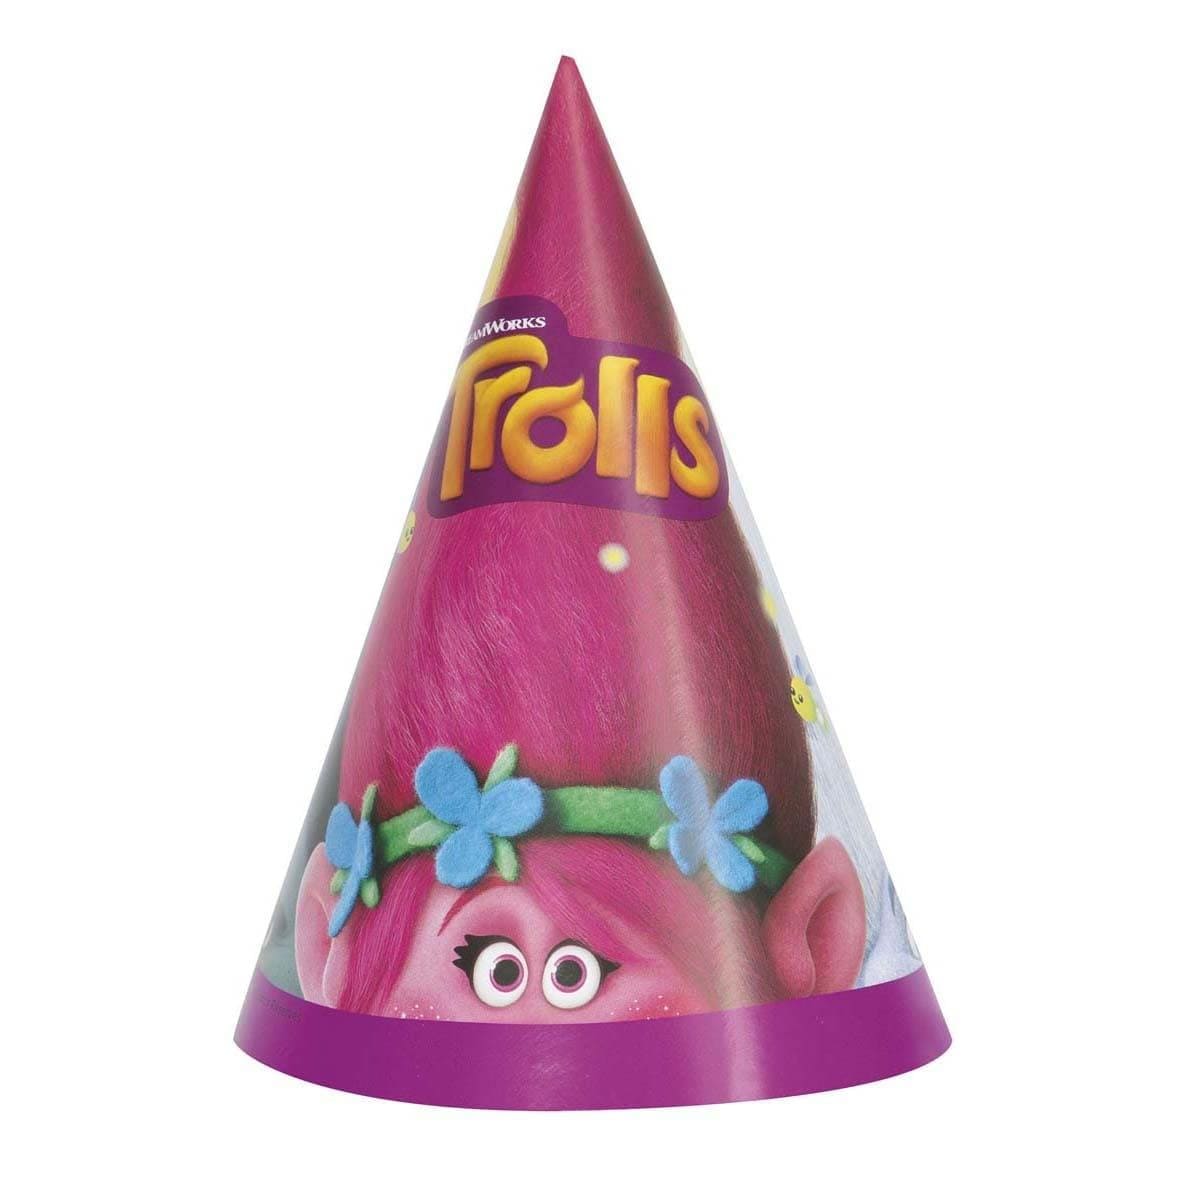 Buy Kids Birthday Trolls party hats, 8 per package sold at Party Expert